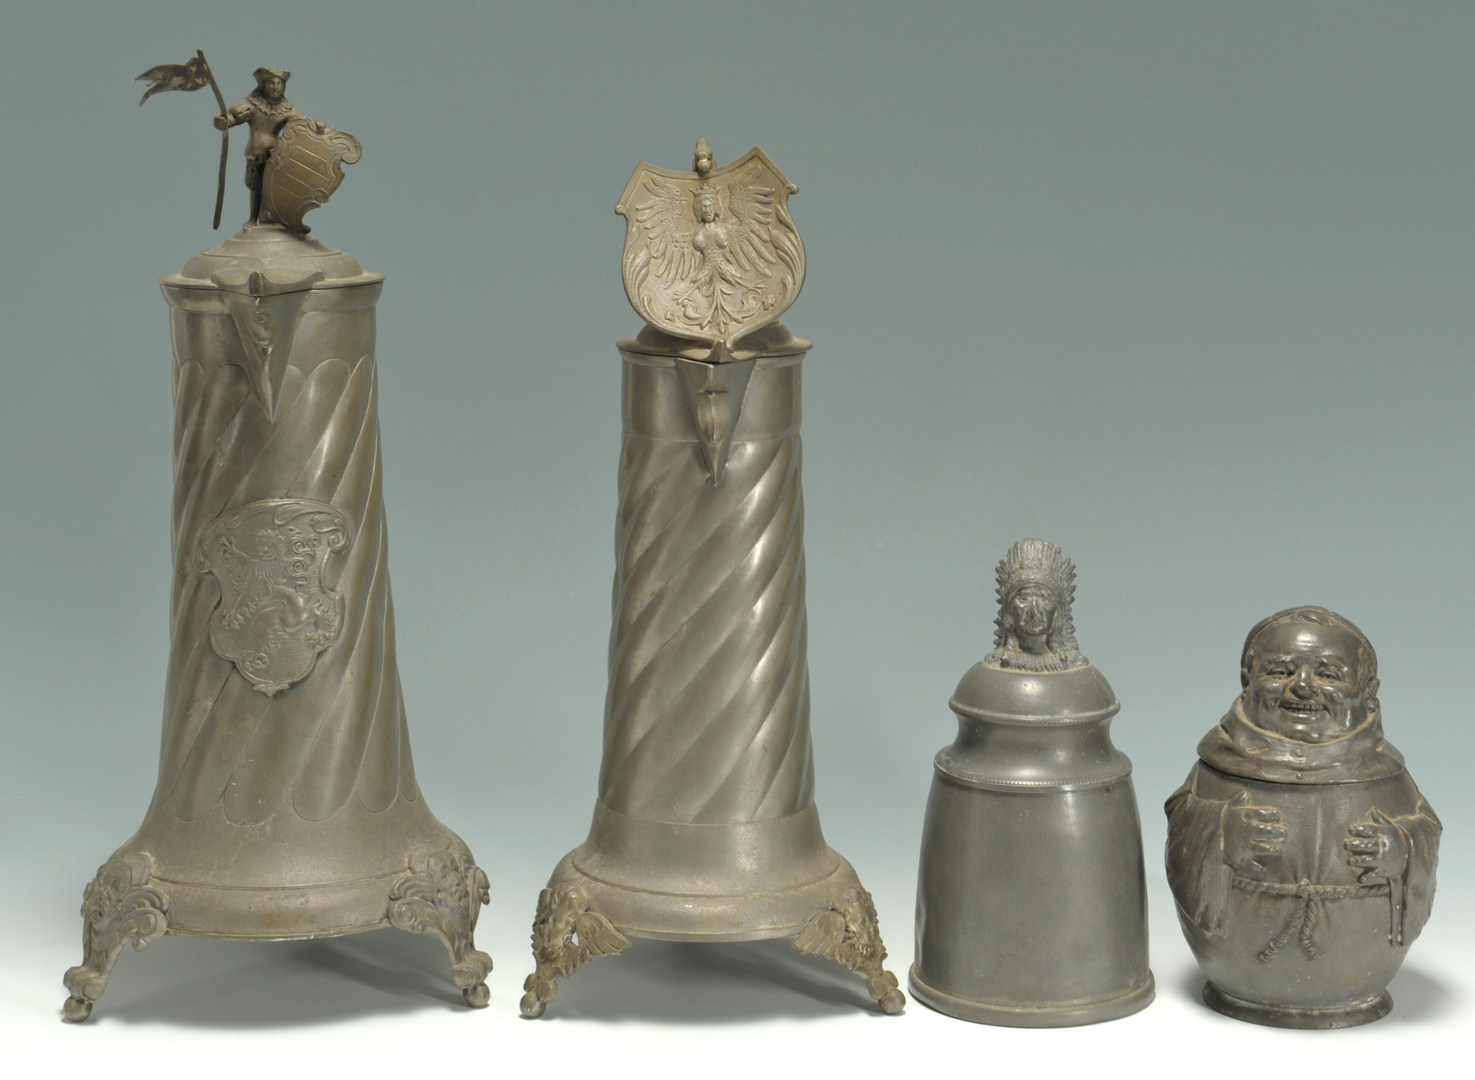 Lot 410: 4 Figural Pewter Steins and pitchers